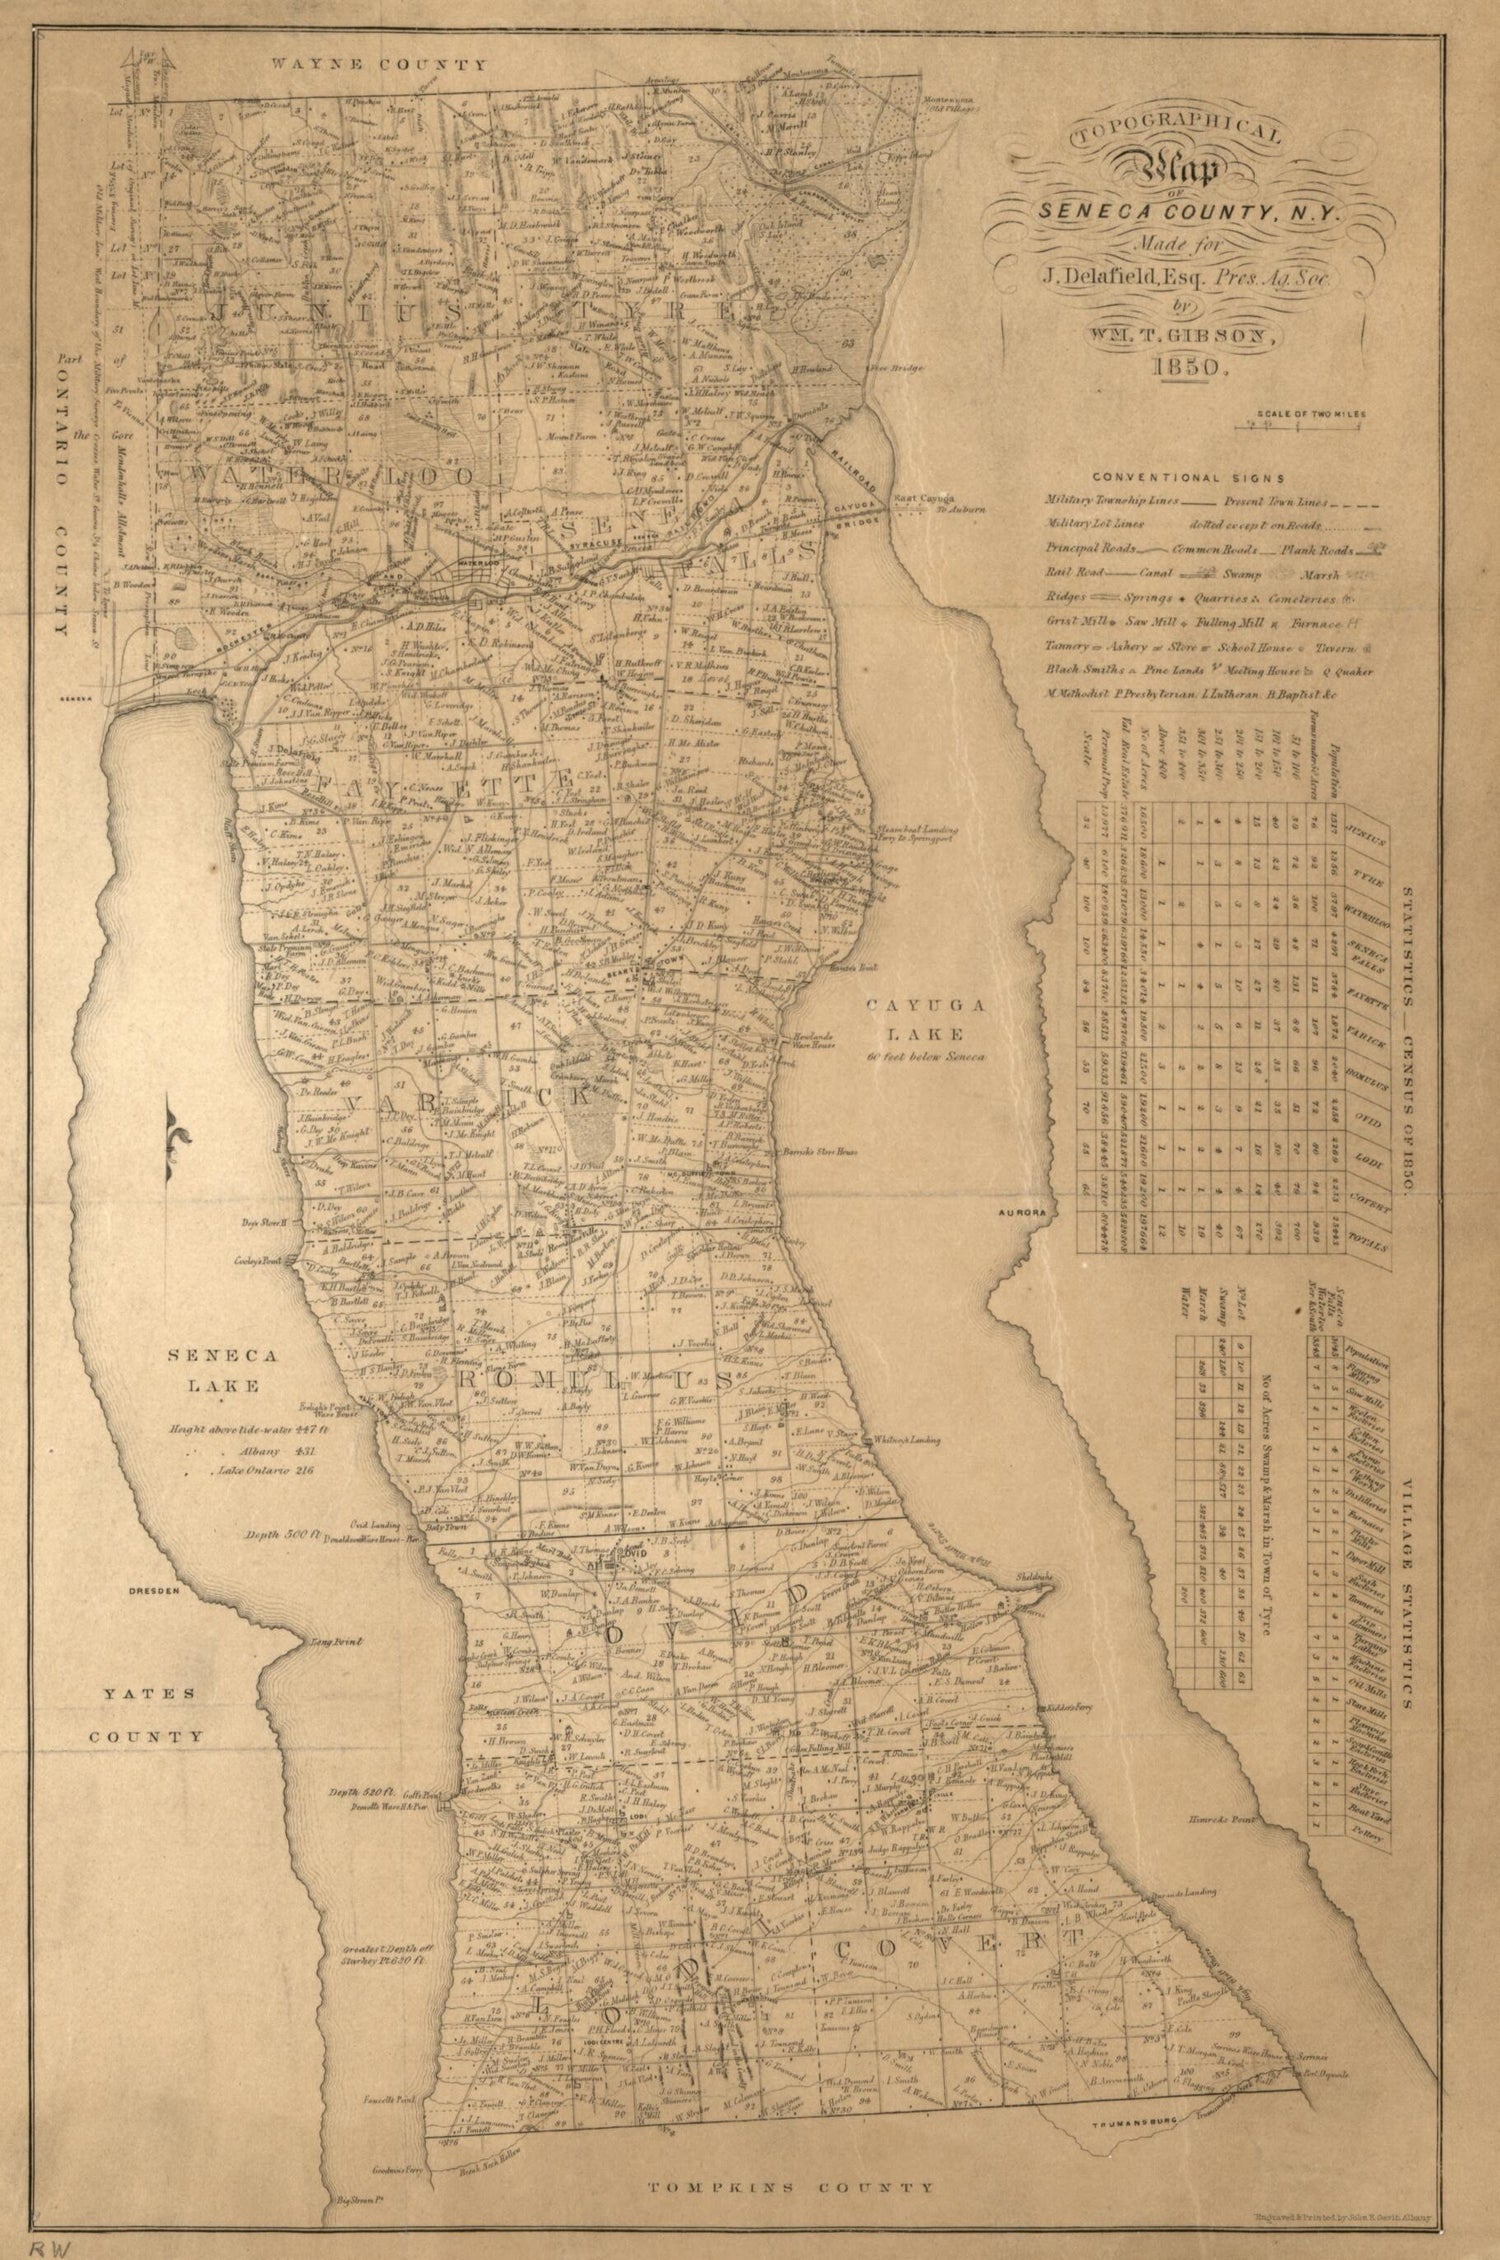 This old map of Topographical Map of Seneca County, New York from 1850 was created by John E. Gavit, Wm. T. (William T.) Gibson,  Seneca County Agricultural Society (N.Y.) in 1850